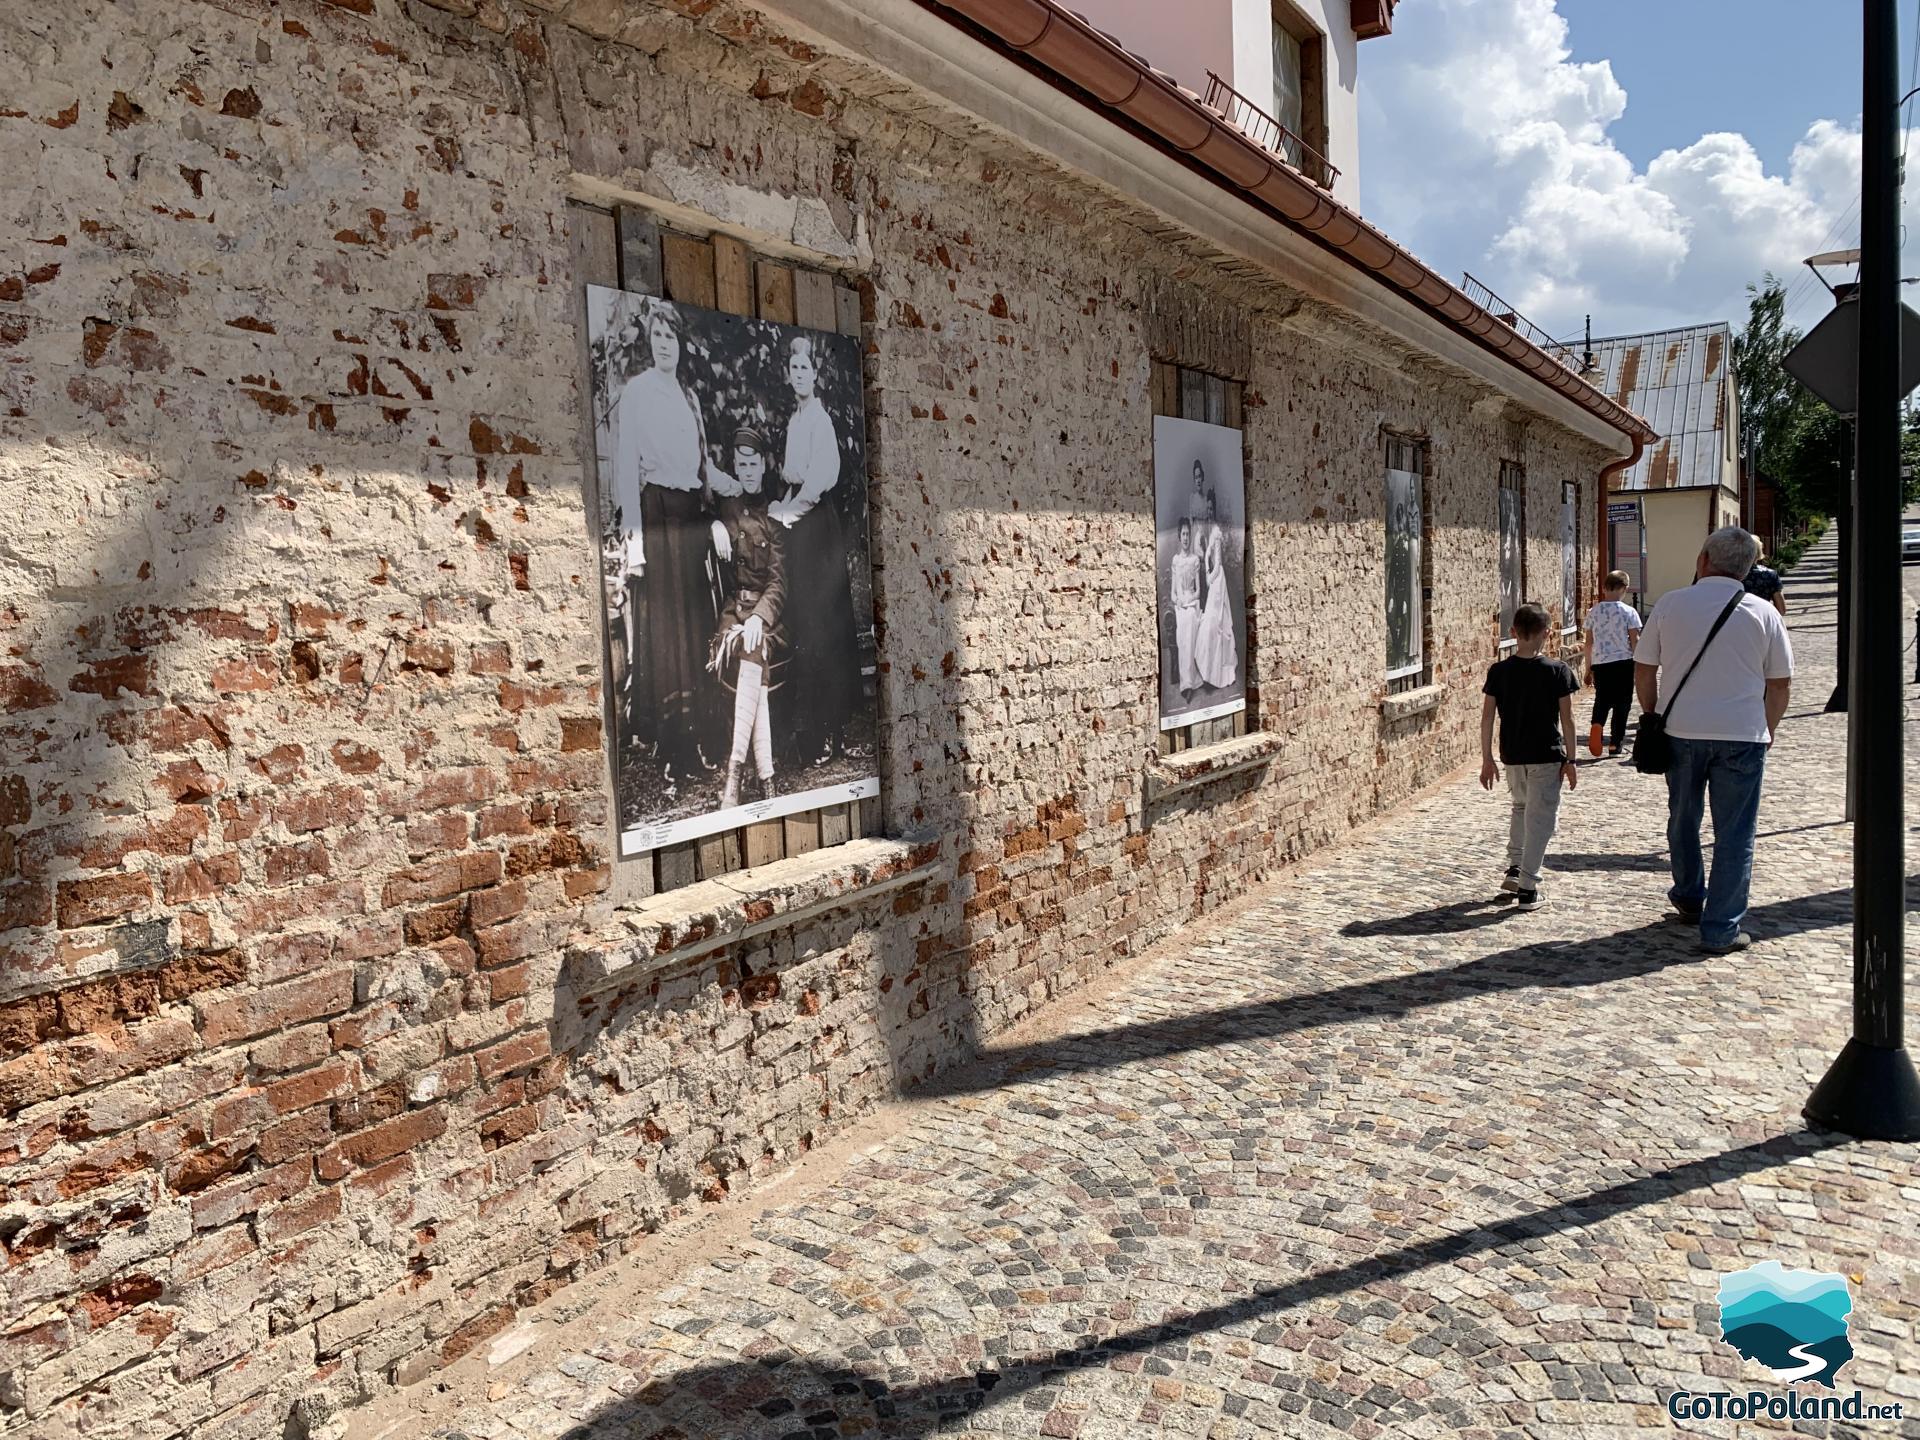 on the old brick building there are huge black-and-white photos depicting the former inhabitants of the town